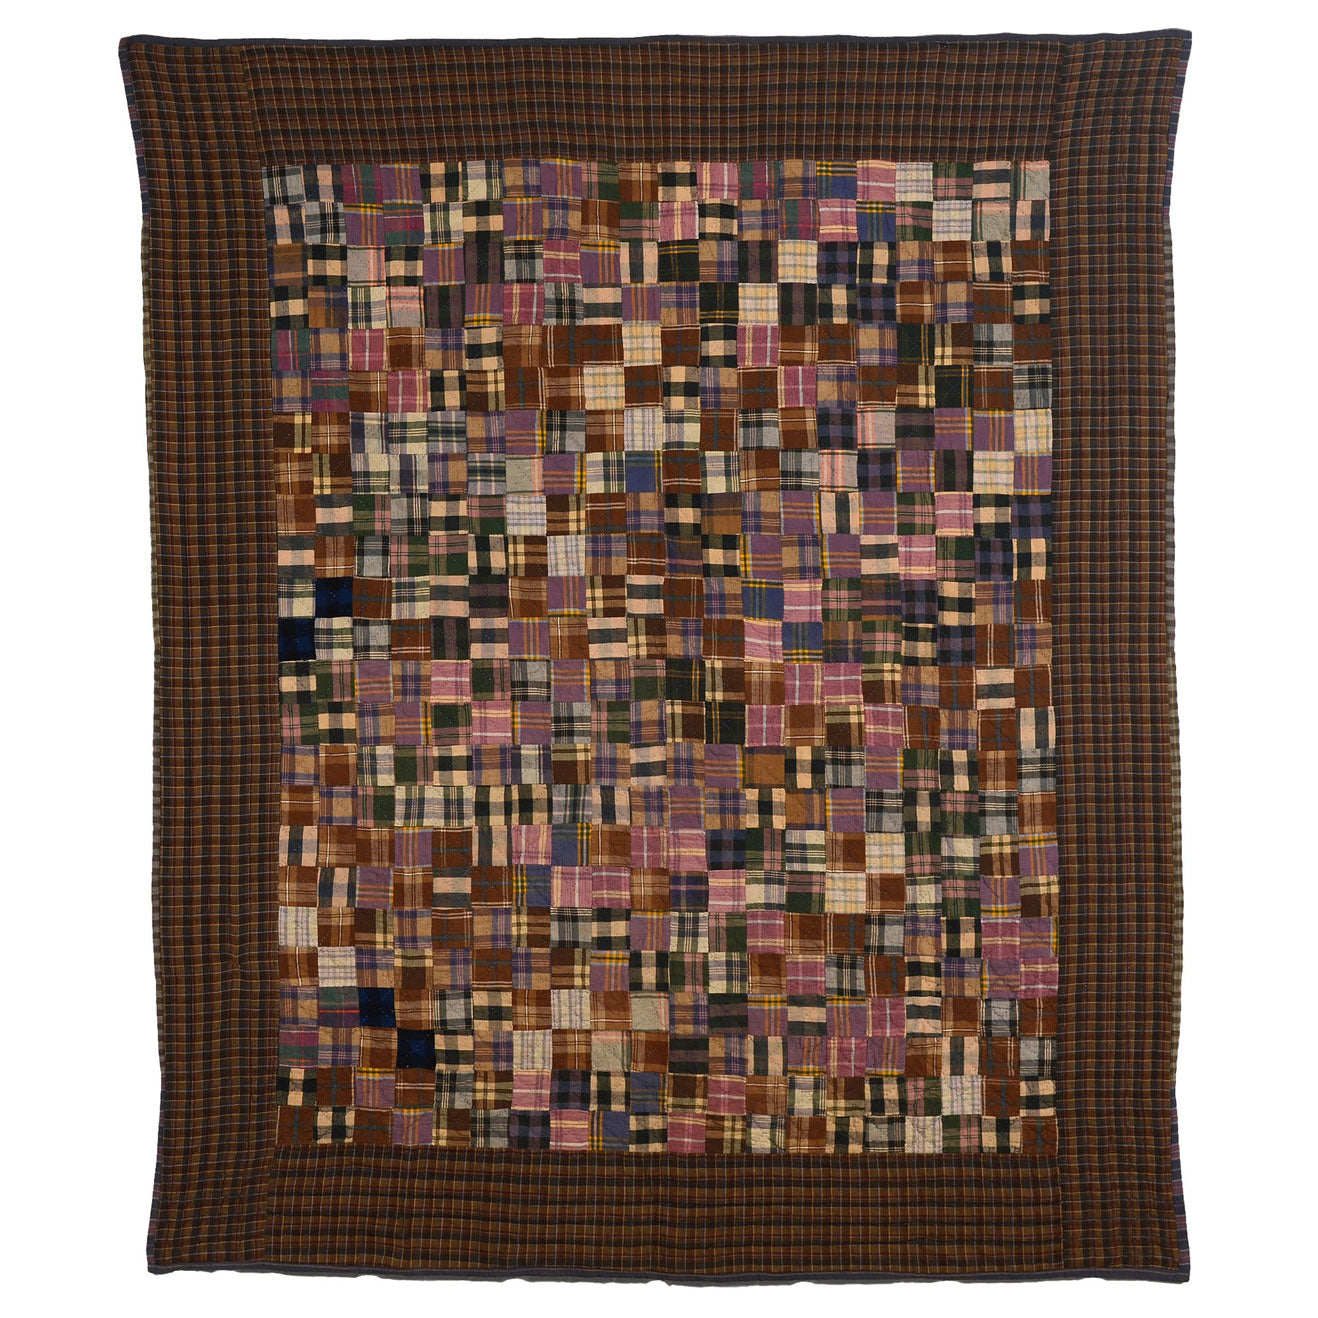 Brown plaid antique quilt with patches of pinks and browns throughout the center.